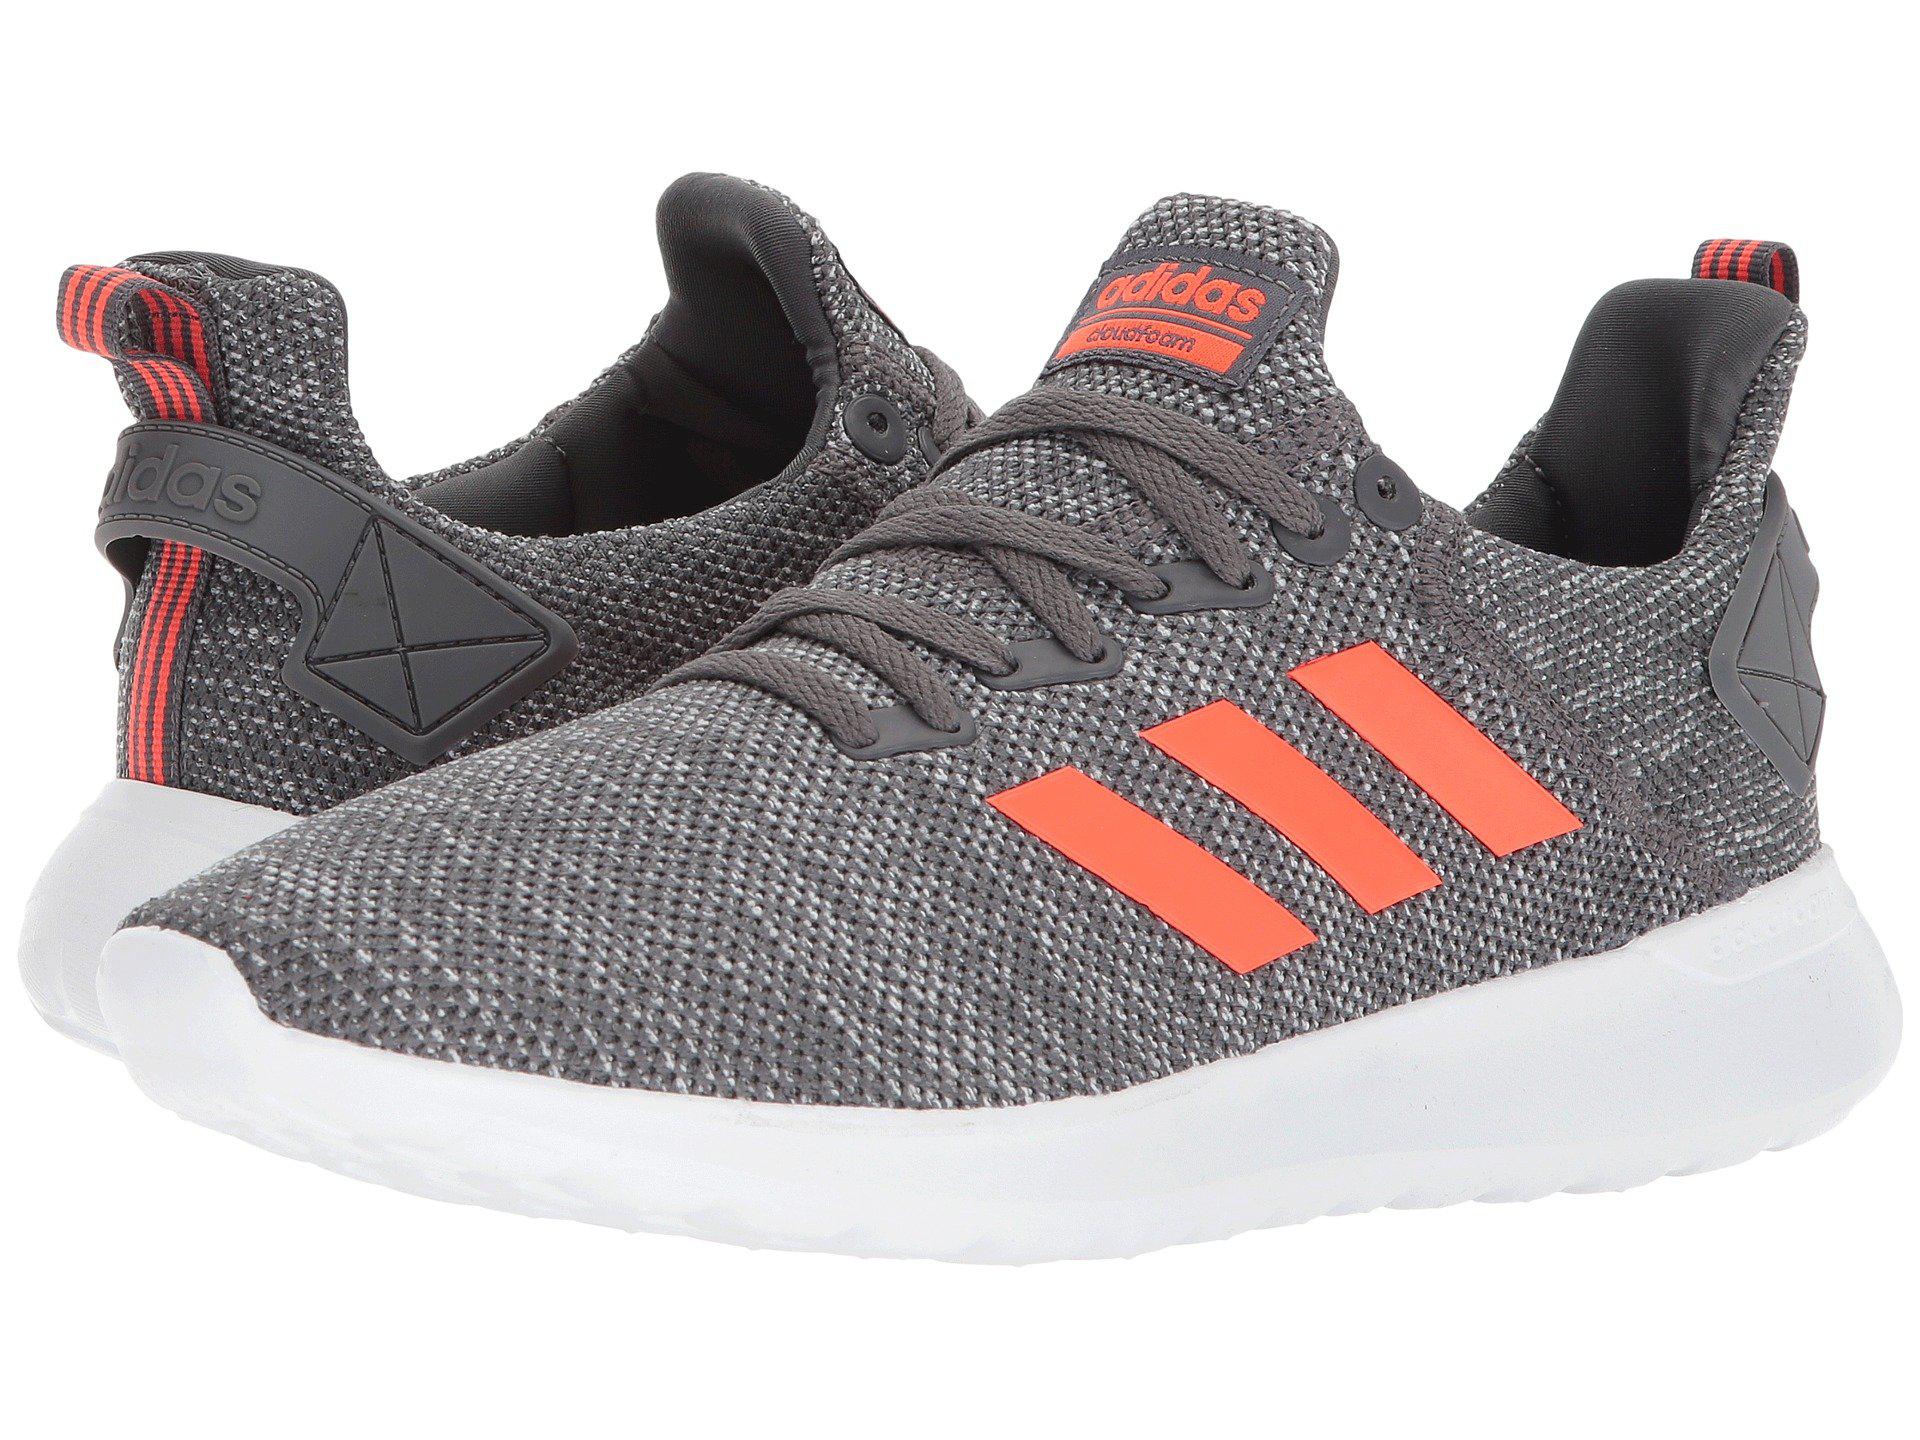 Lyst - Adidas Cloudfoam Lite Racer Byd in Gray for Men